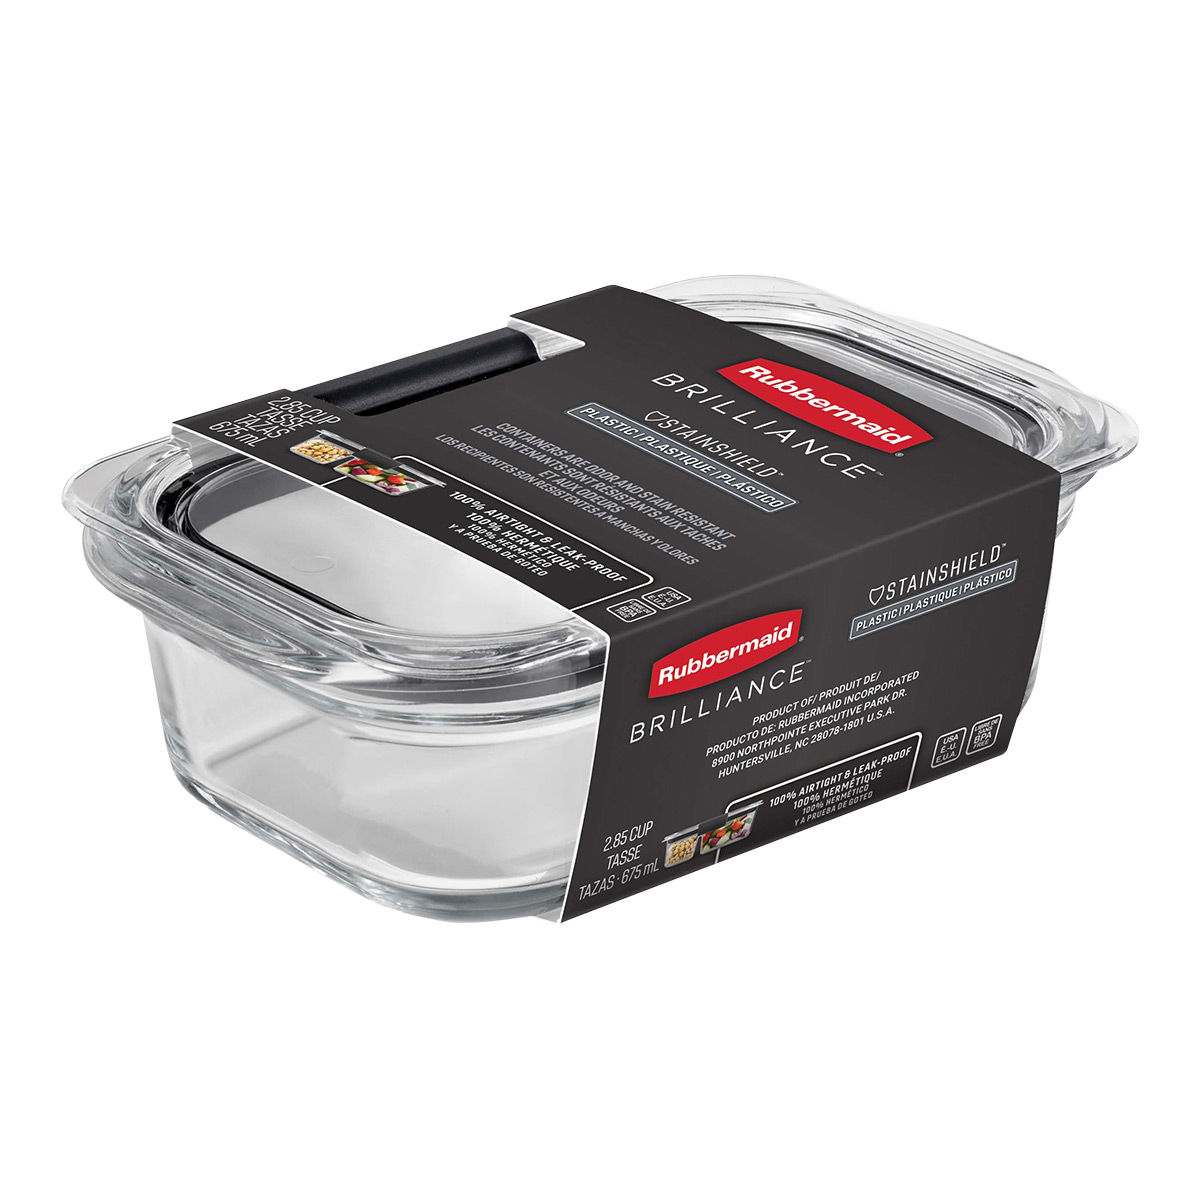 https://www.containerstore.com/catalogimages/498192/10096077-2183422_01-rubbermaid-ven.jpg